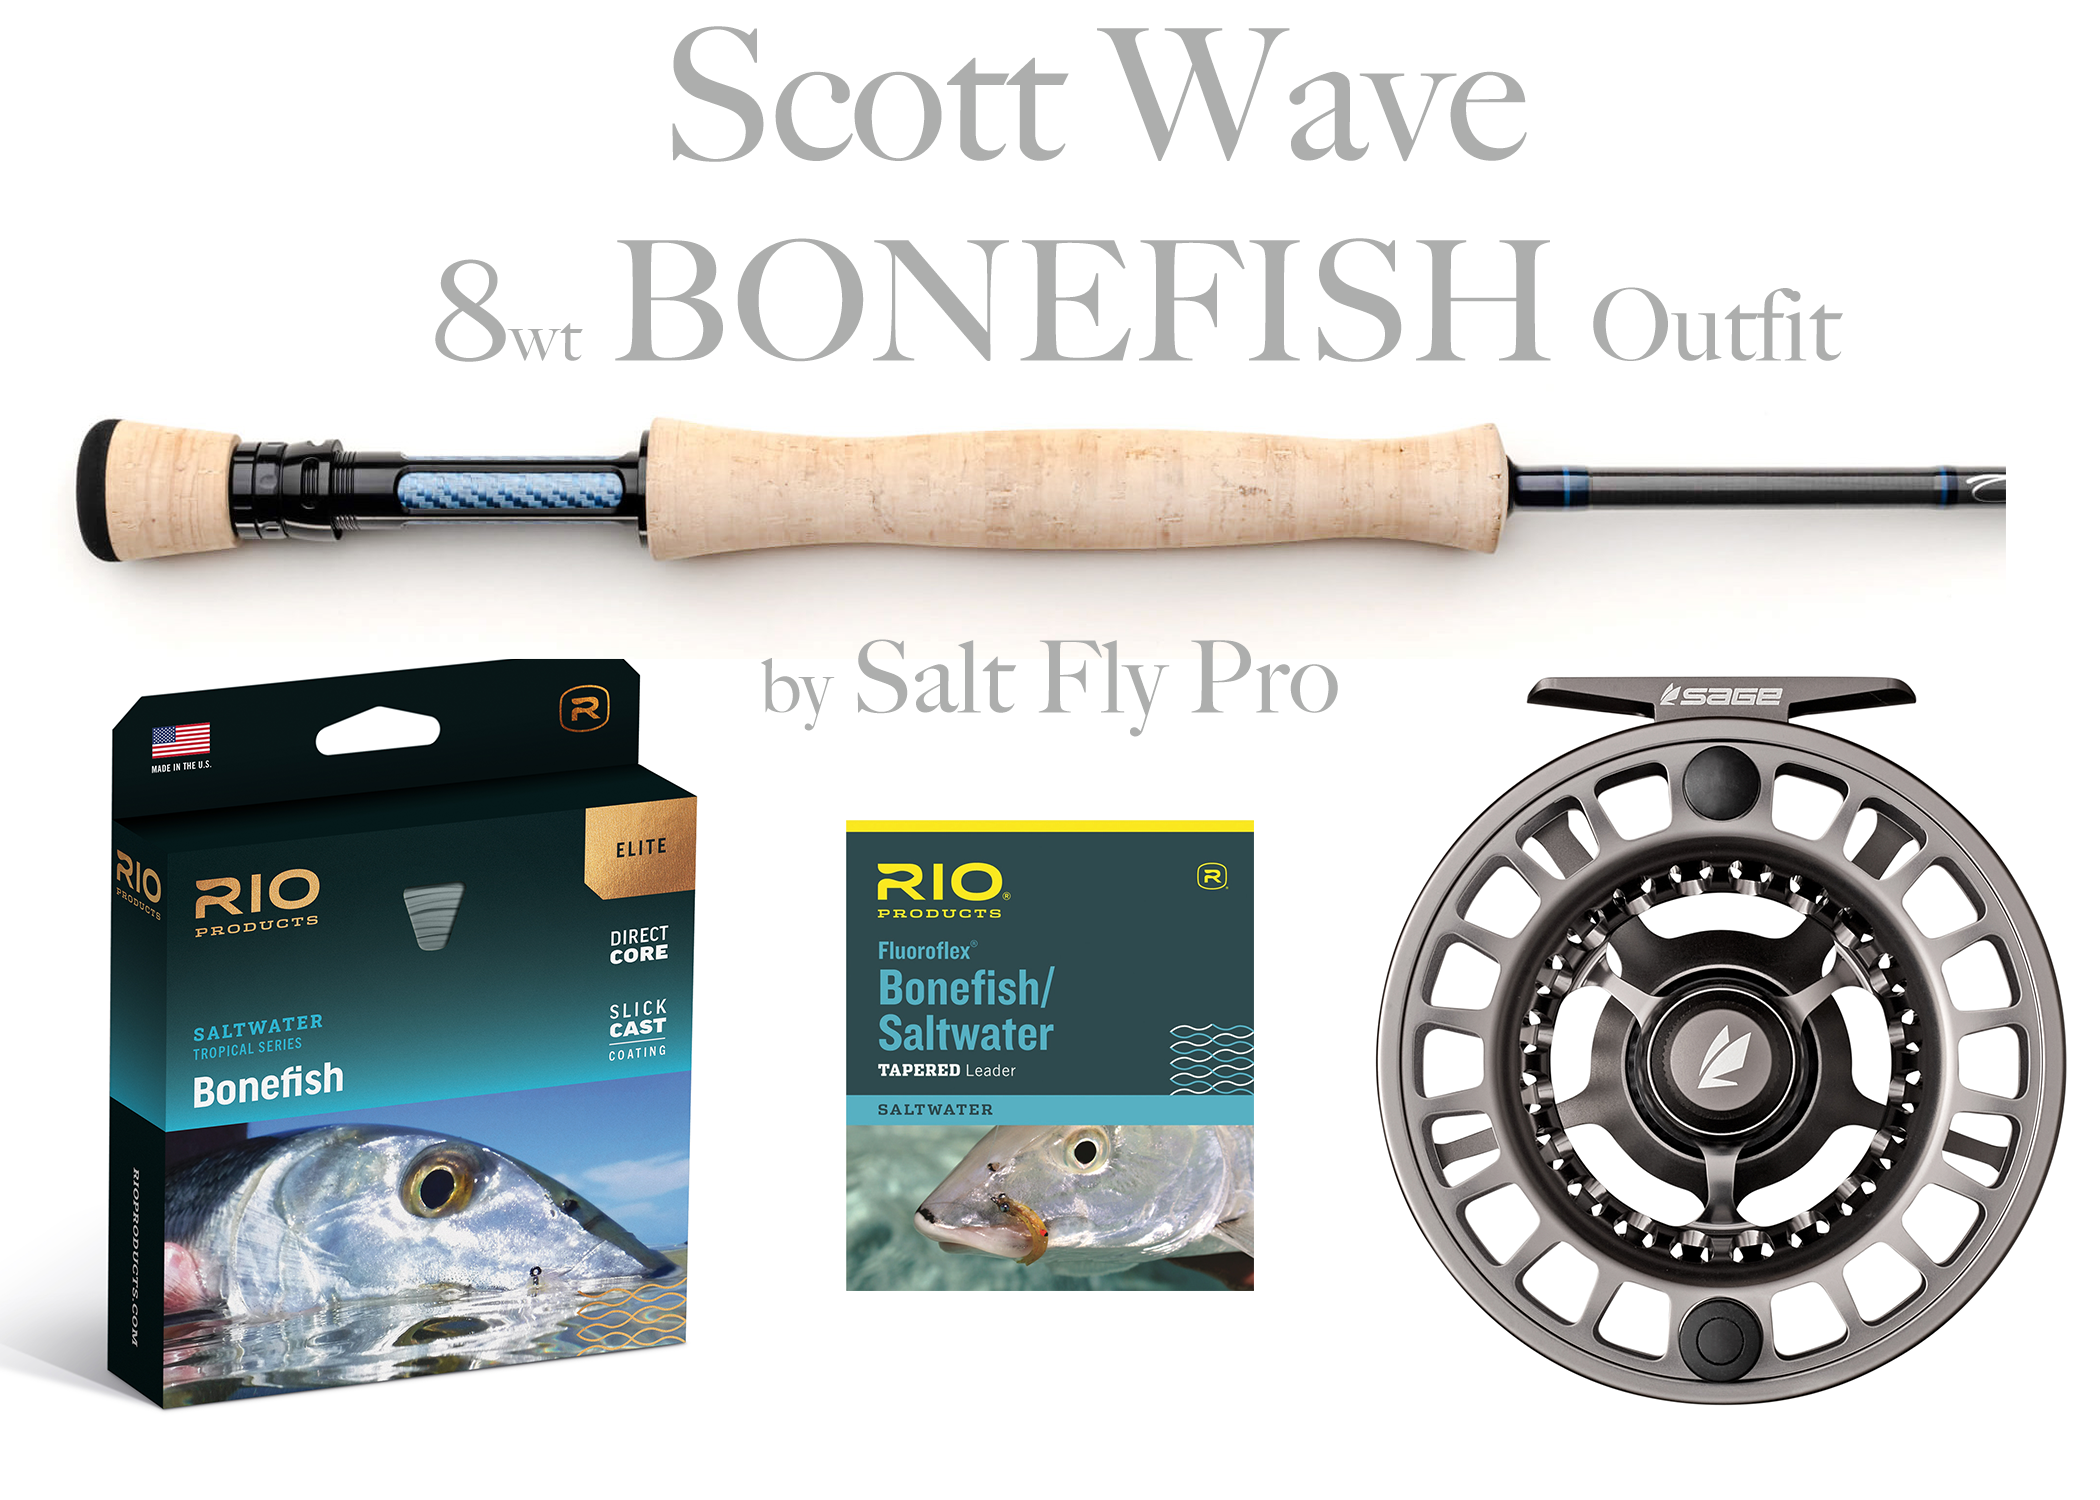 Scott WAVE 10wt PERMIT Outfit Combo - NEW!